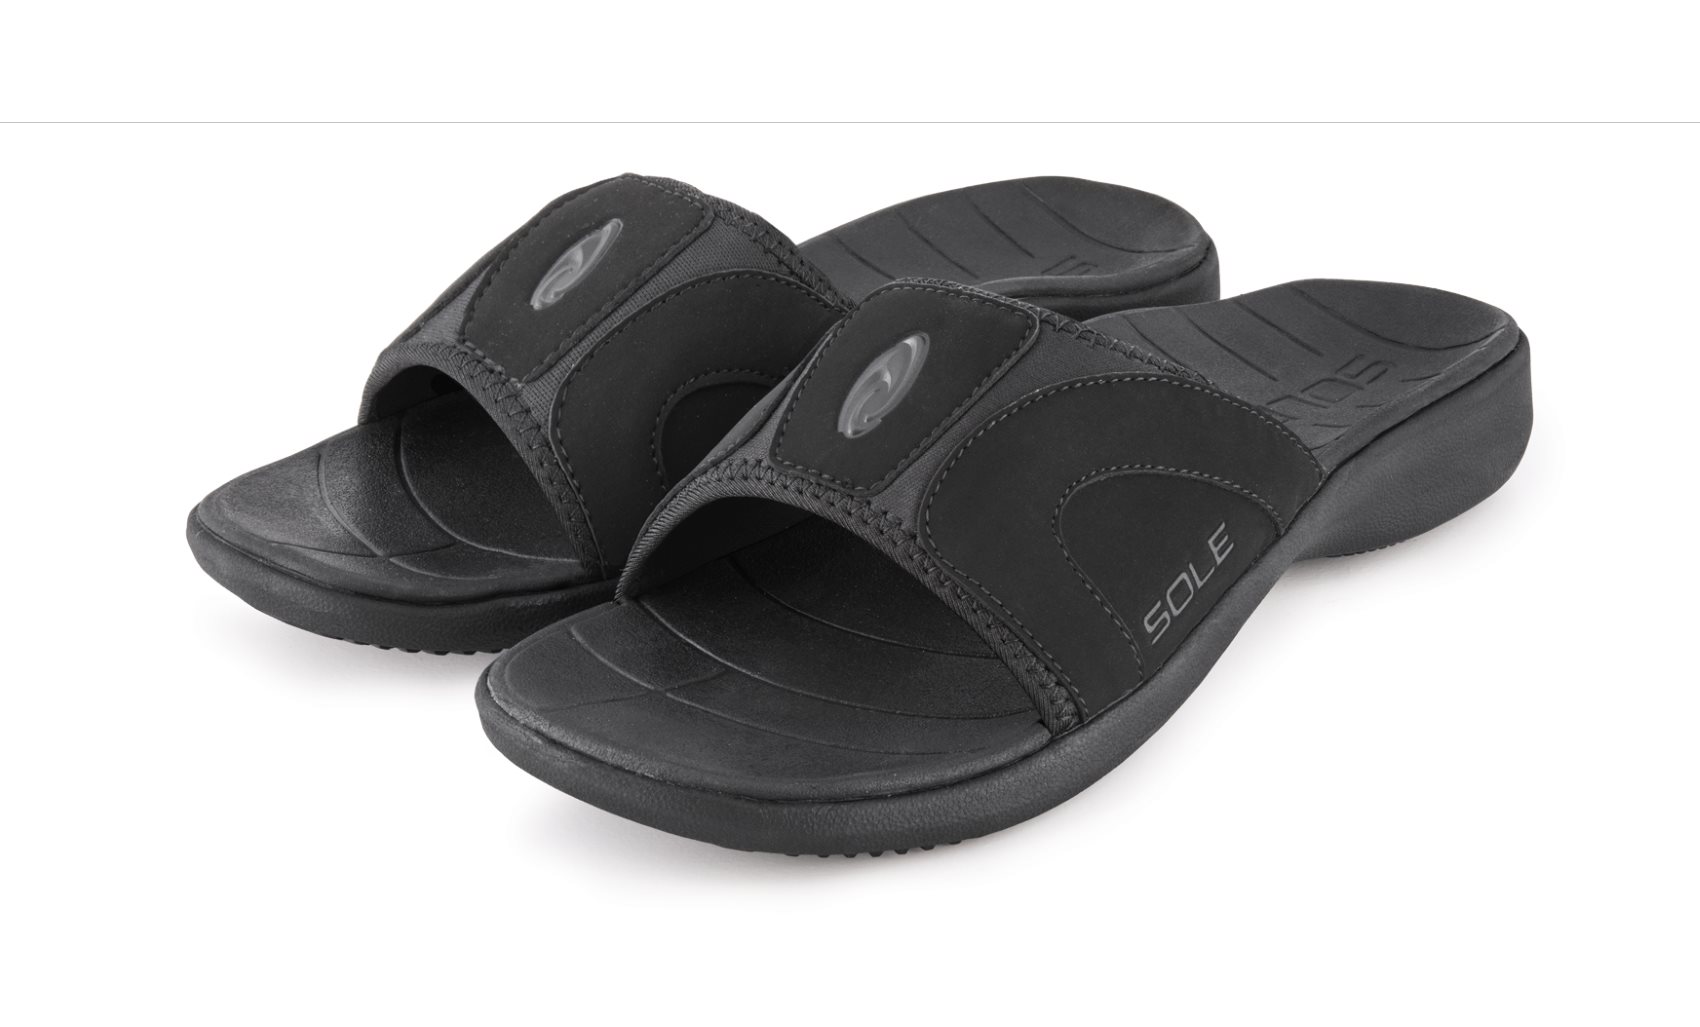 mens sandals with arch support plantar fasciitis